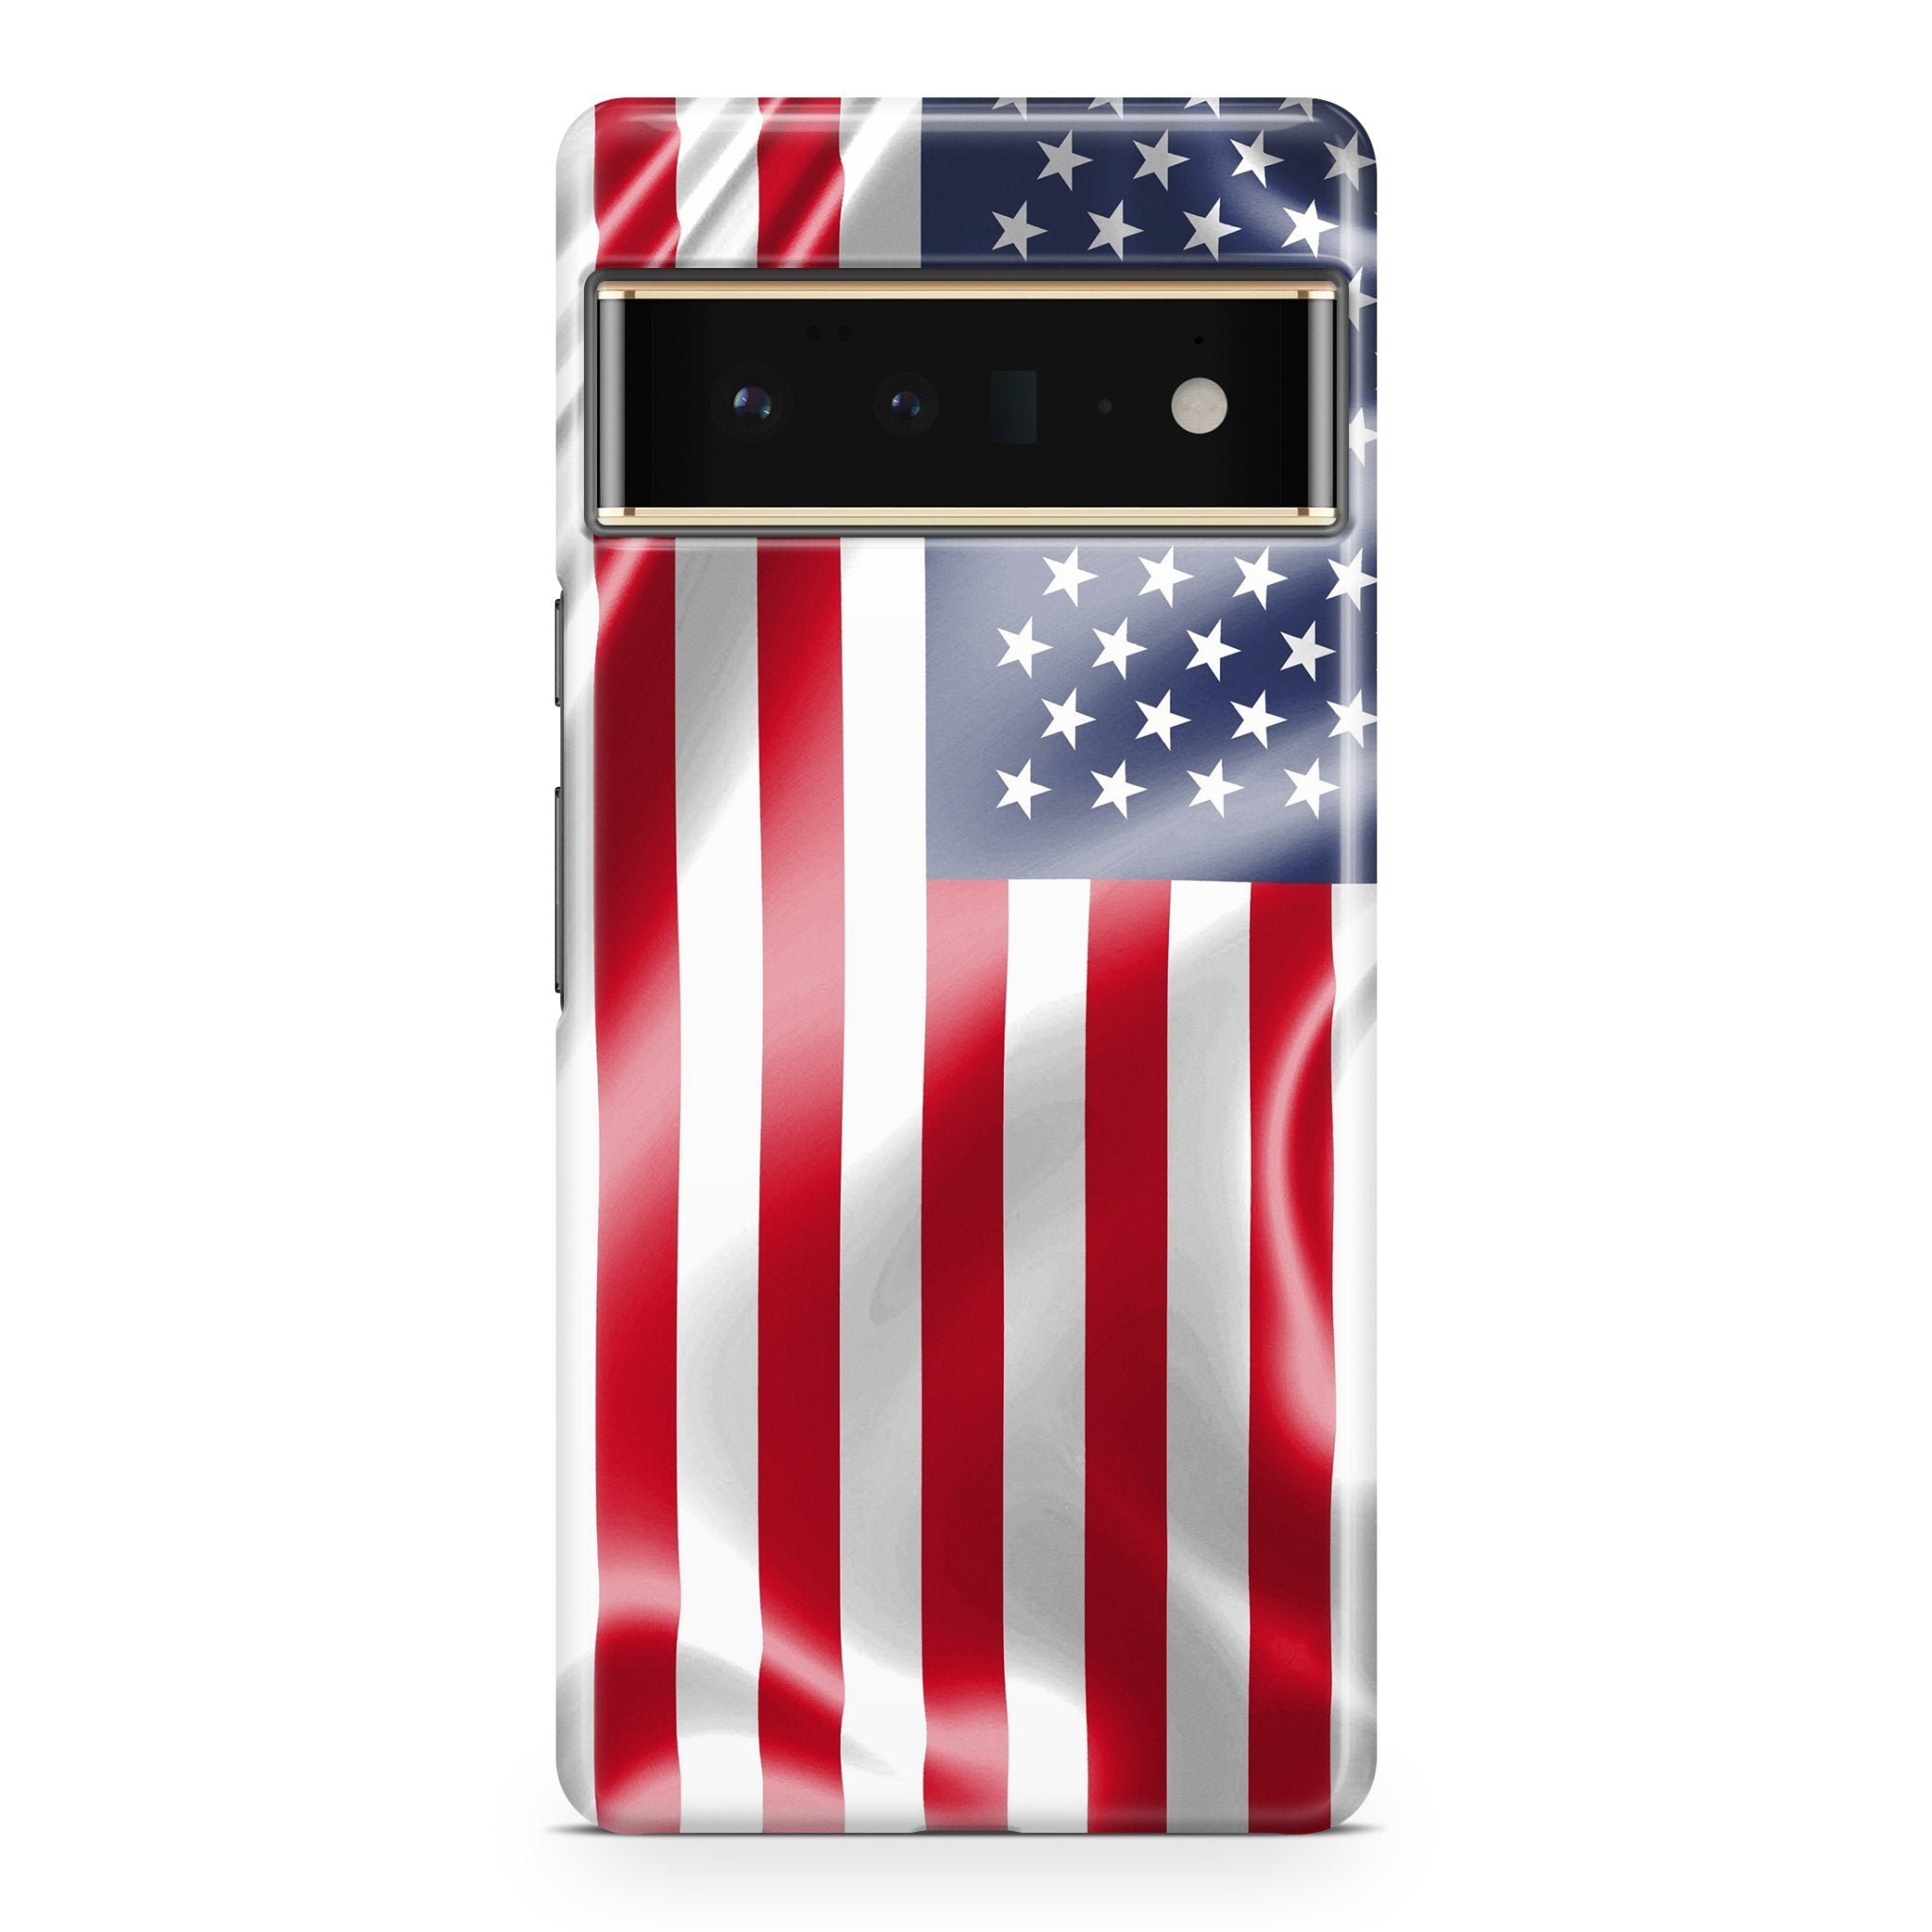 Waving American Flag - Google phone case designs by CaseSwagger